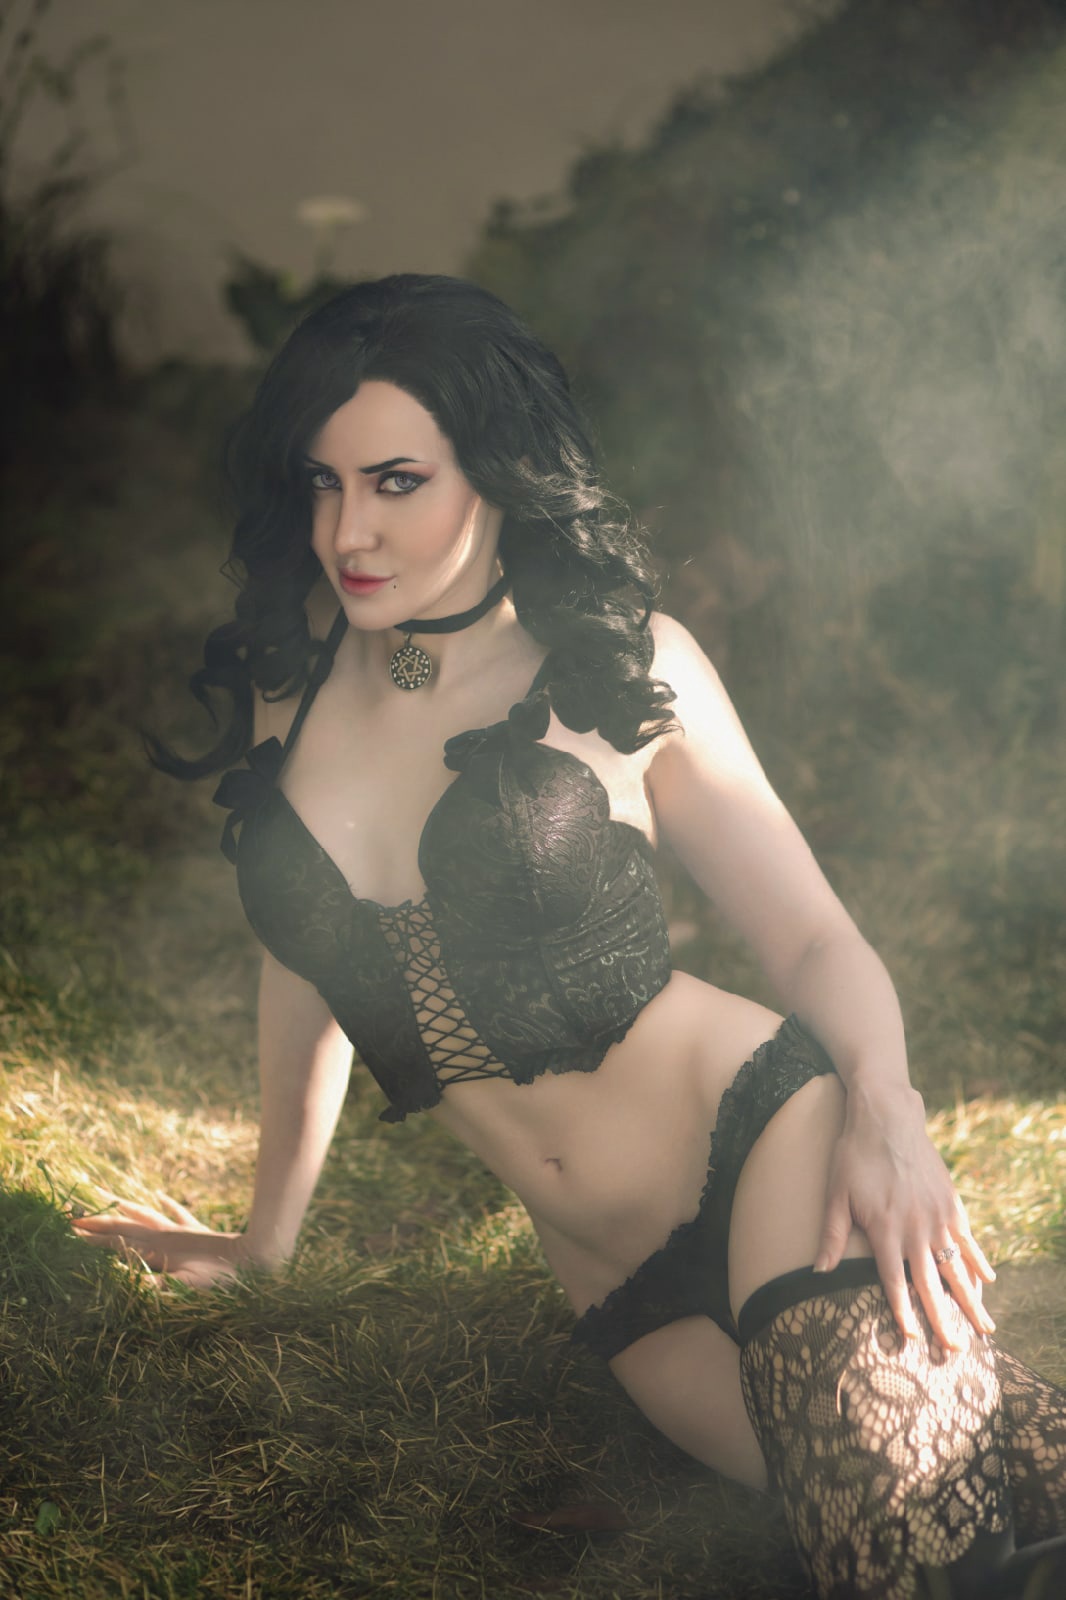 Yennefer of vengerberg the witcher 3 voiced standalone follower фото 54